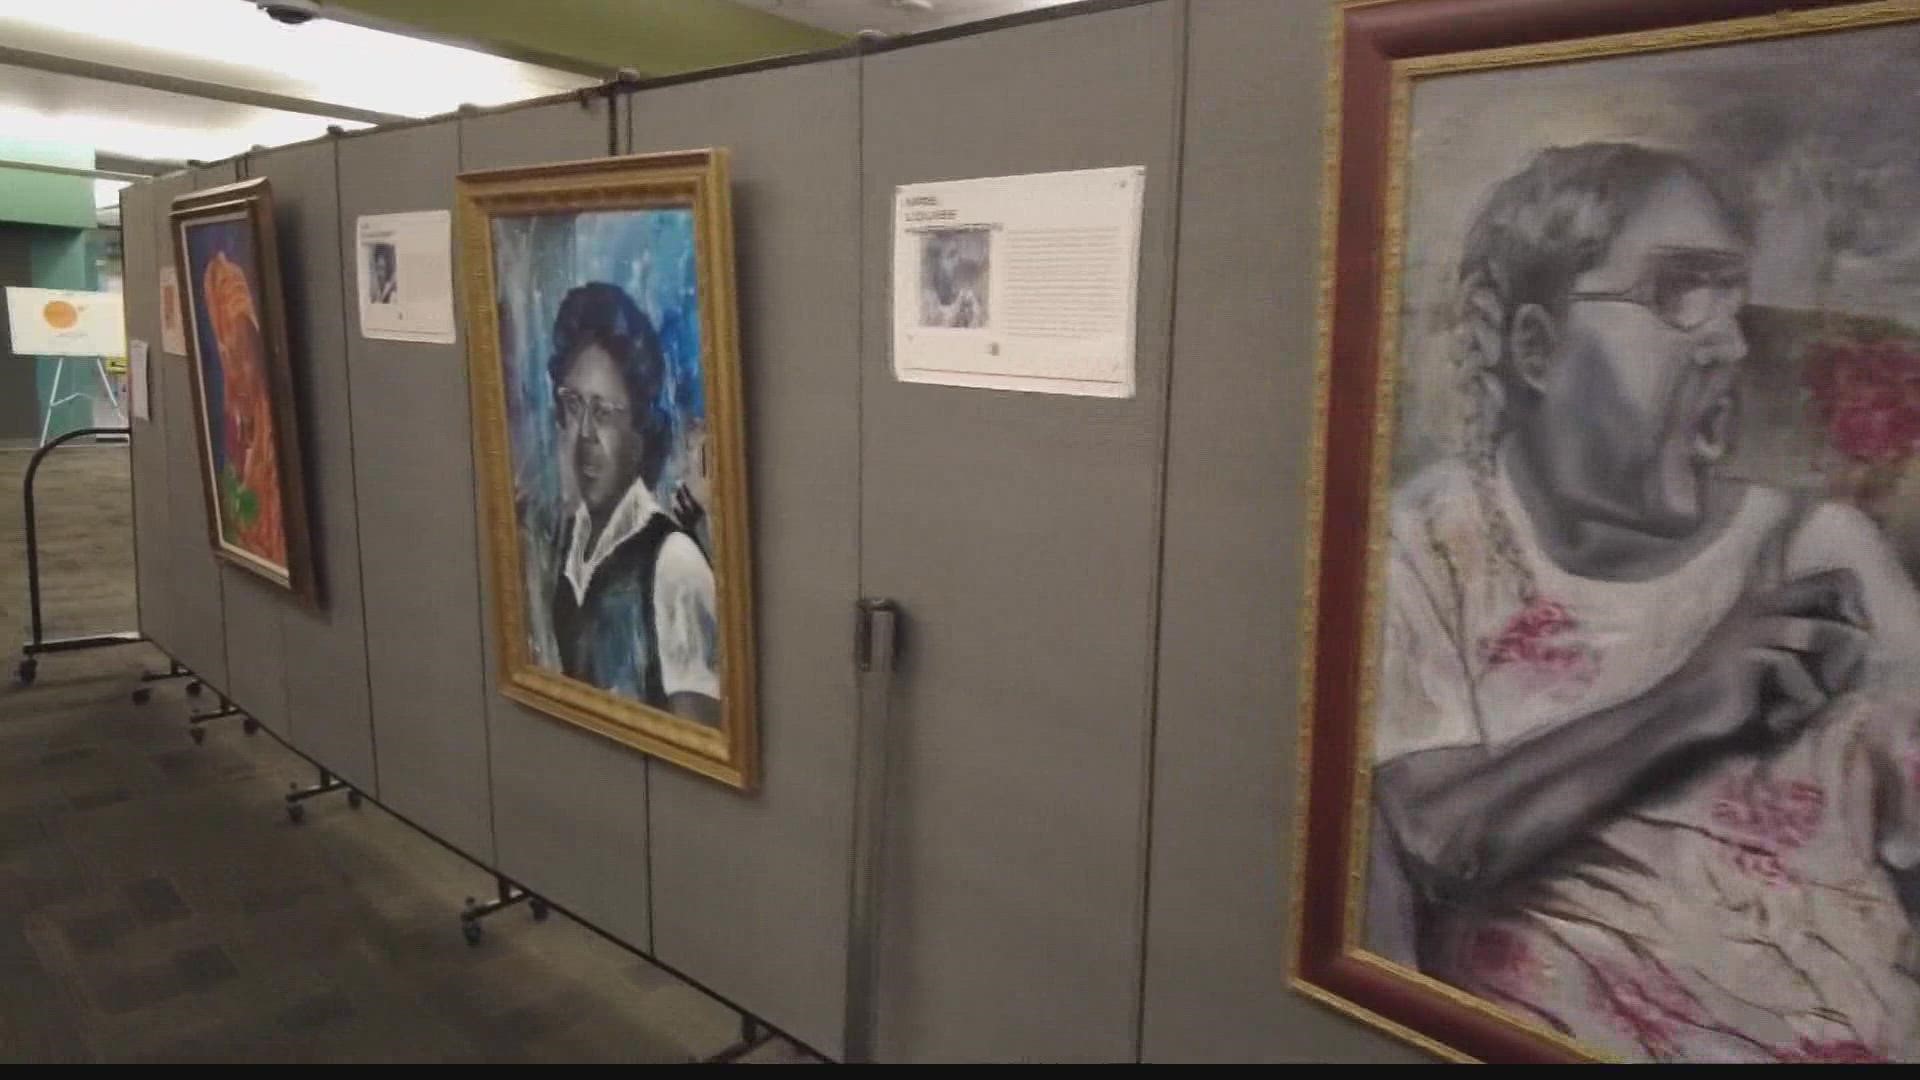 We take a look at the art exhibit that one man has curated to showcase Mesa's history of Black culture.